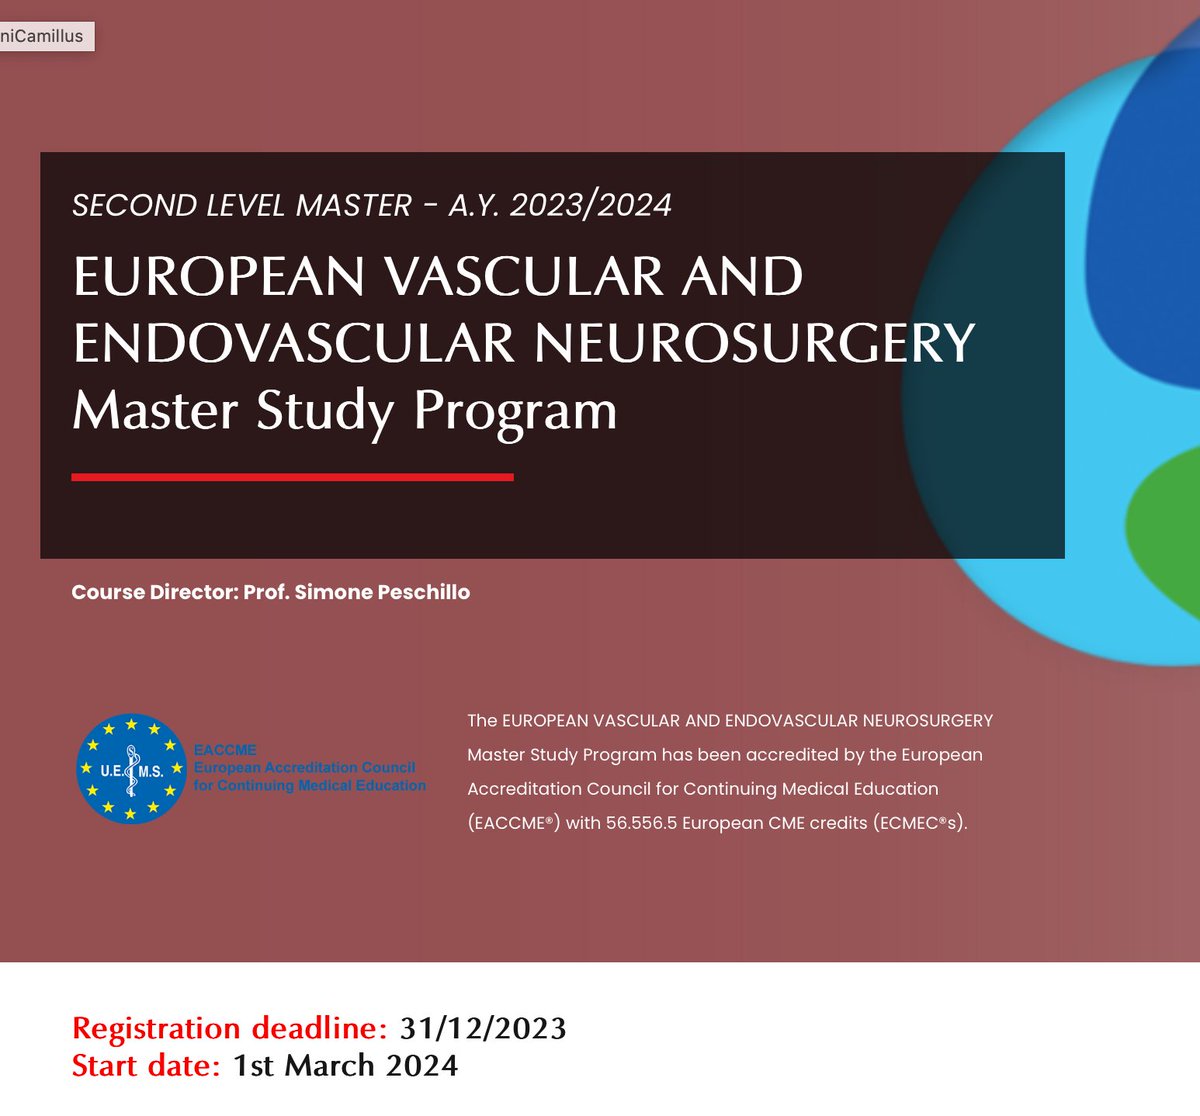 The dates for the II Edition of the EANS BOOTCAMP 2024 are now online. This year too we have a stellar faculty. eans.org/page/Vascular-… Alongside the EUROPEAN Master Study Program, now accredited as a UEMS-EACCME course (unicamillus.org/master-and-cou…), the training offer is complete.